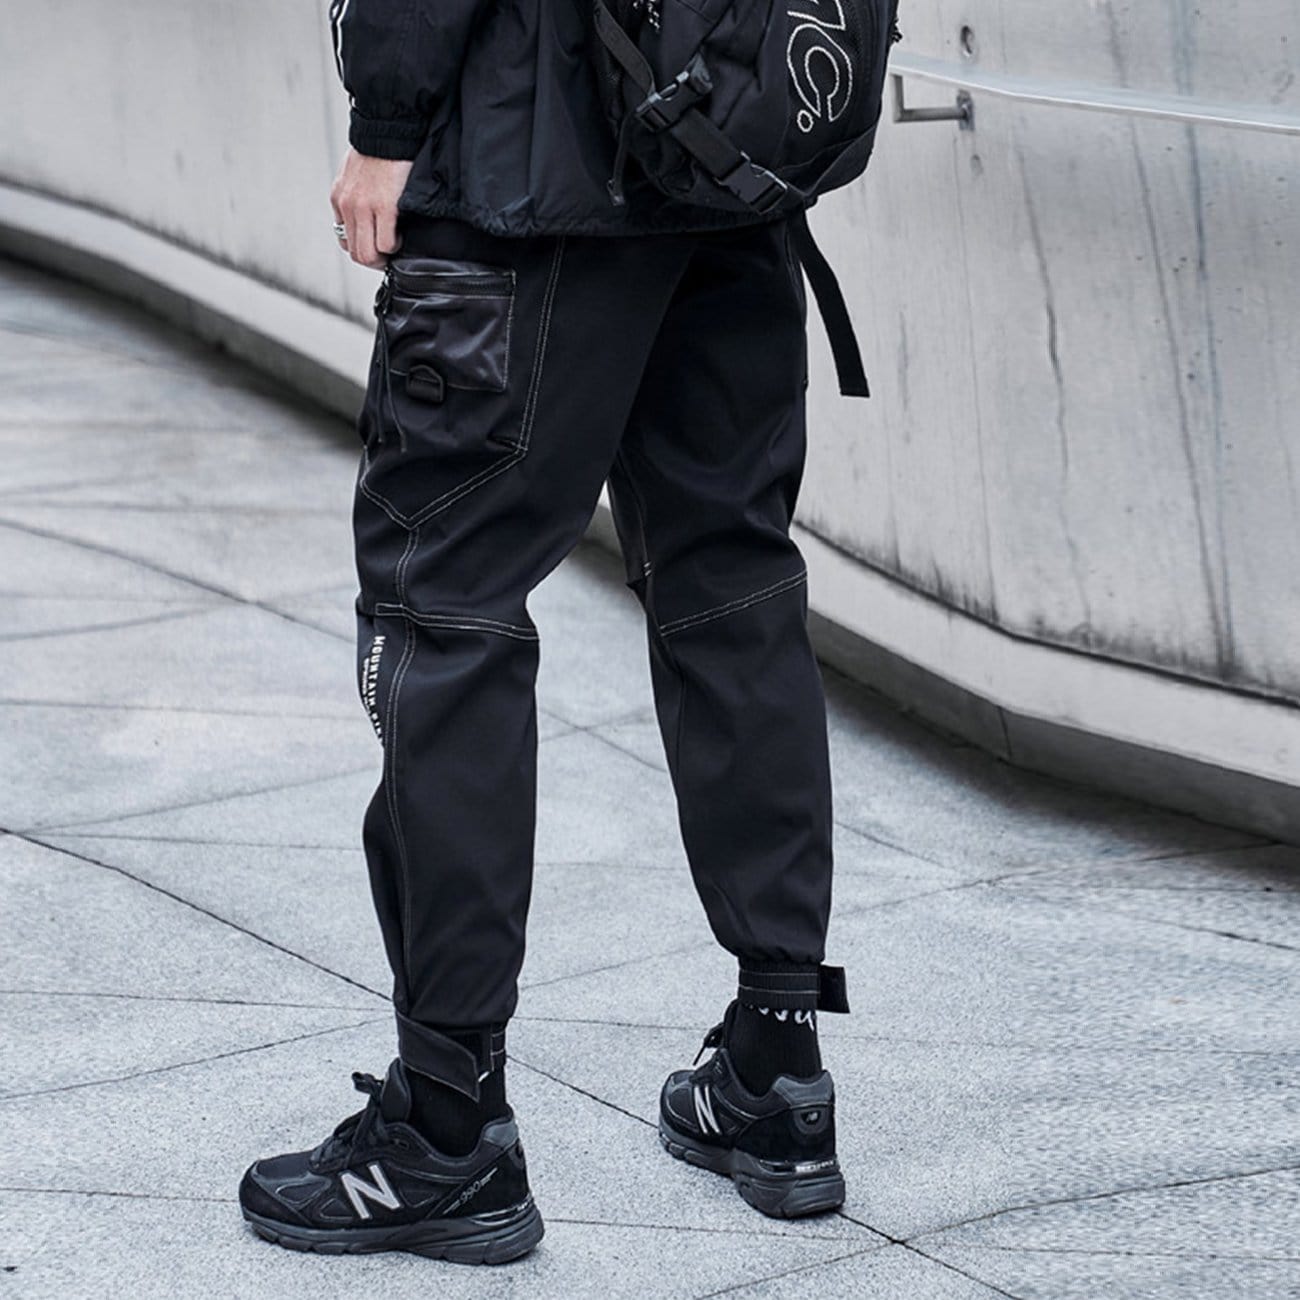 TO Function Bright Line Zipper Pockets Velcro Cargo Pants